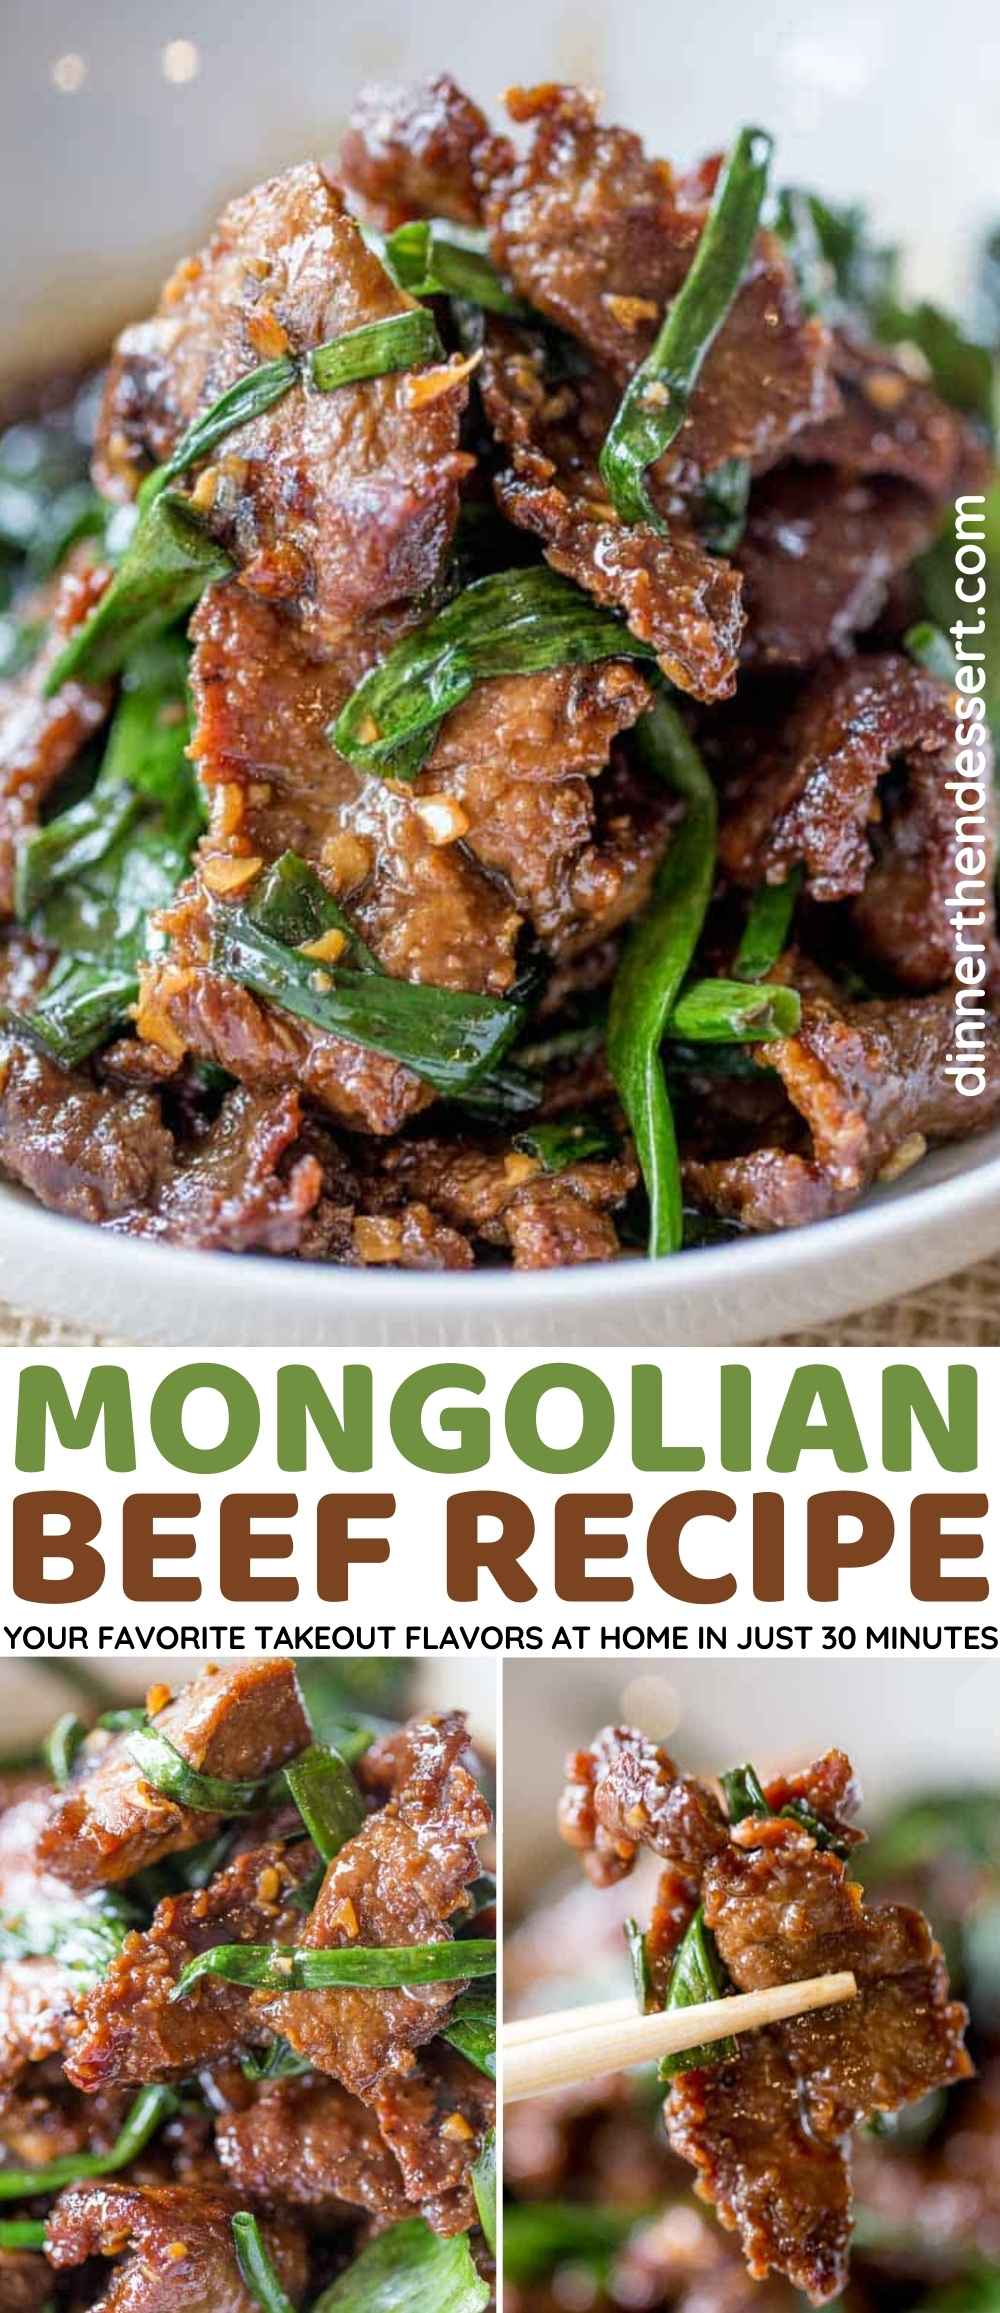 25 Quick Diced Beef Recipes to Try for Dinner - Insanely Good